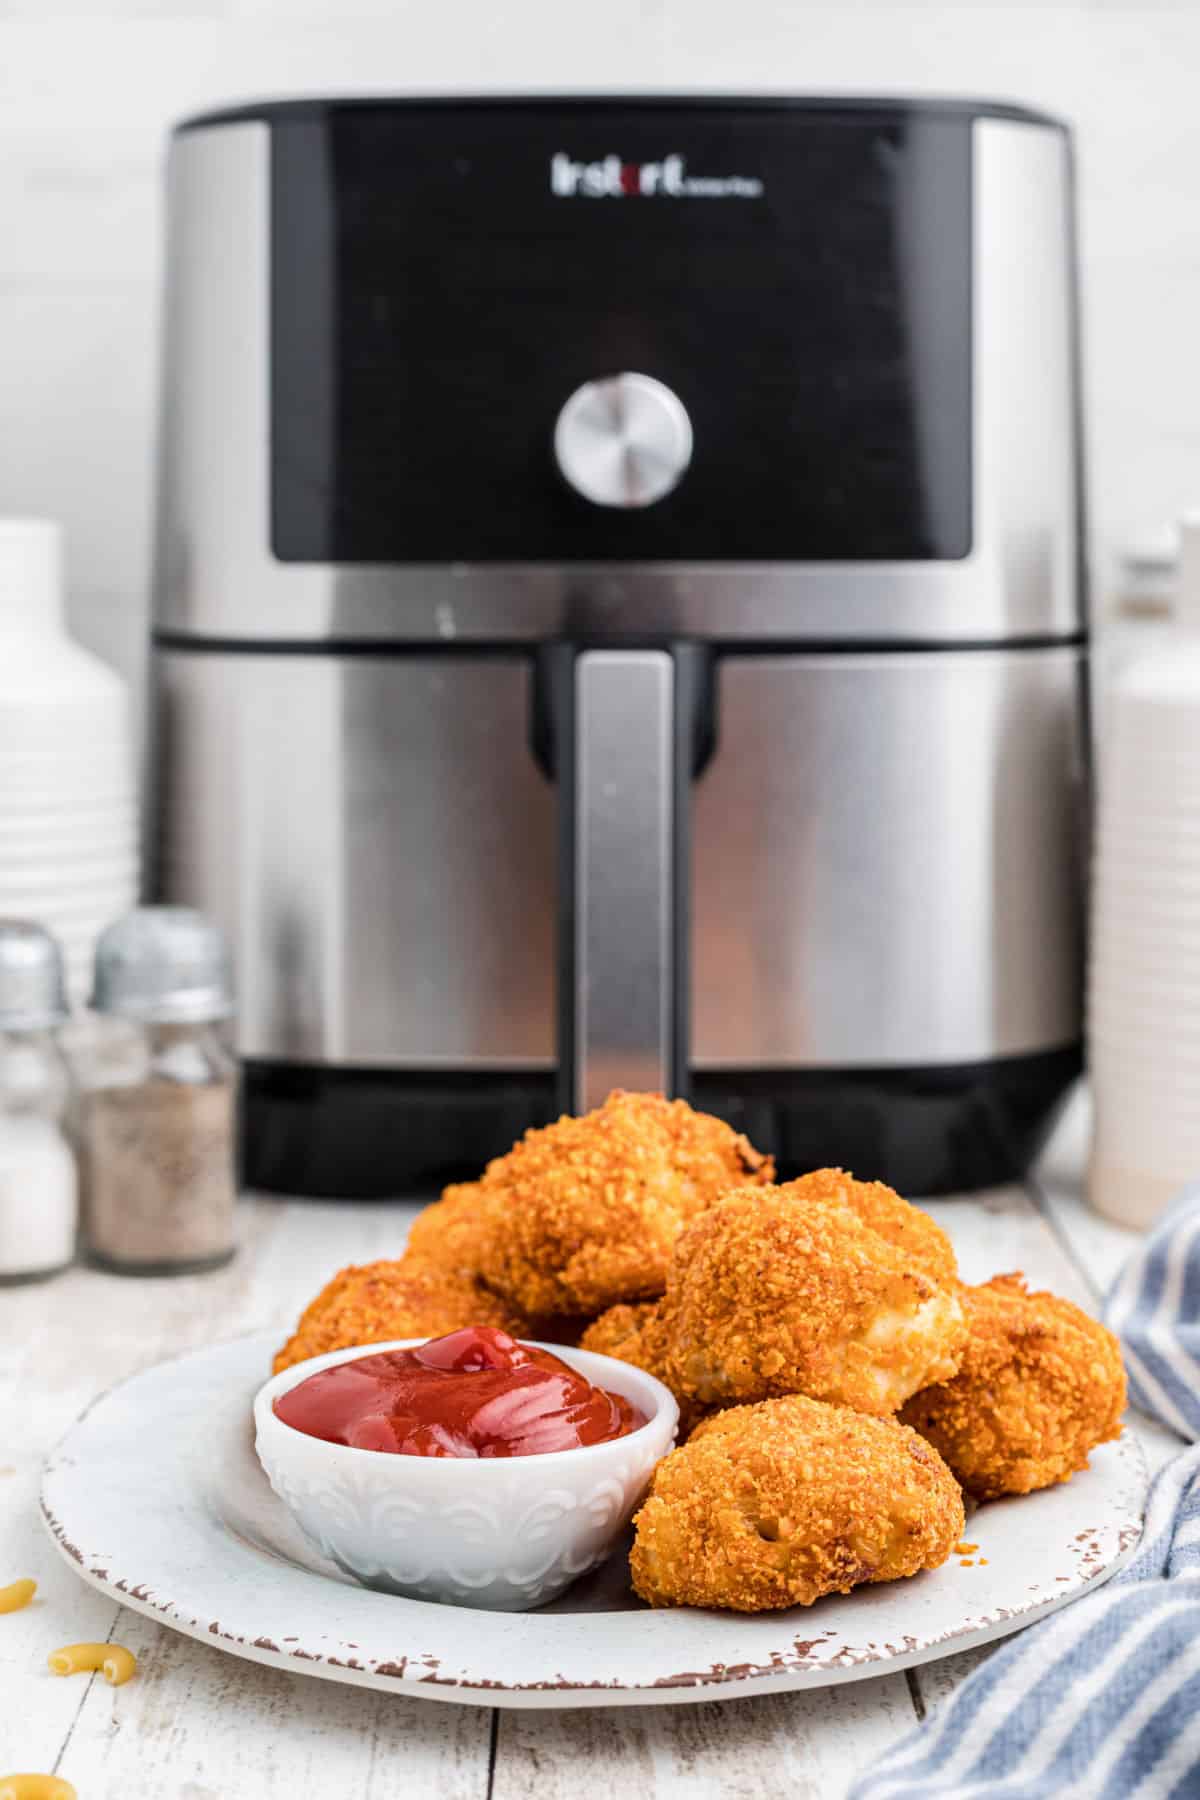 A plate full of mac and cheese bites with an air fryer in the background.